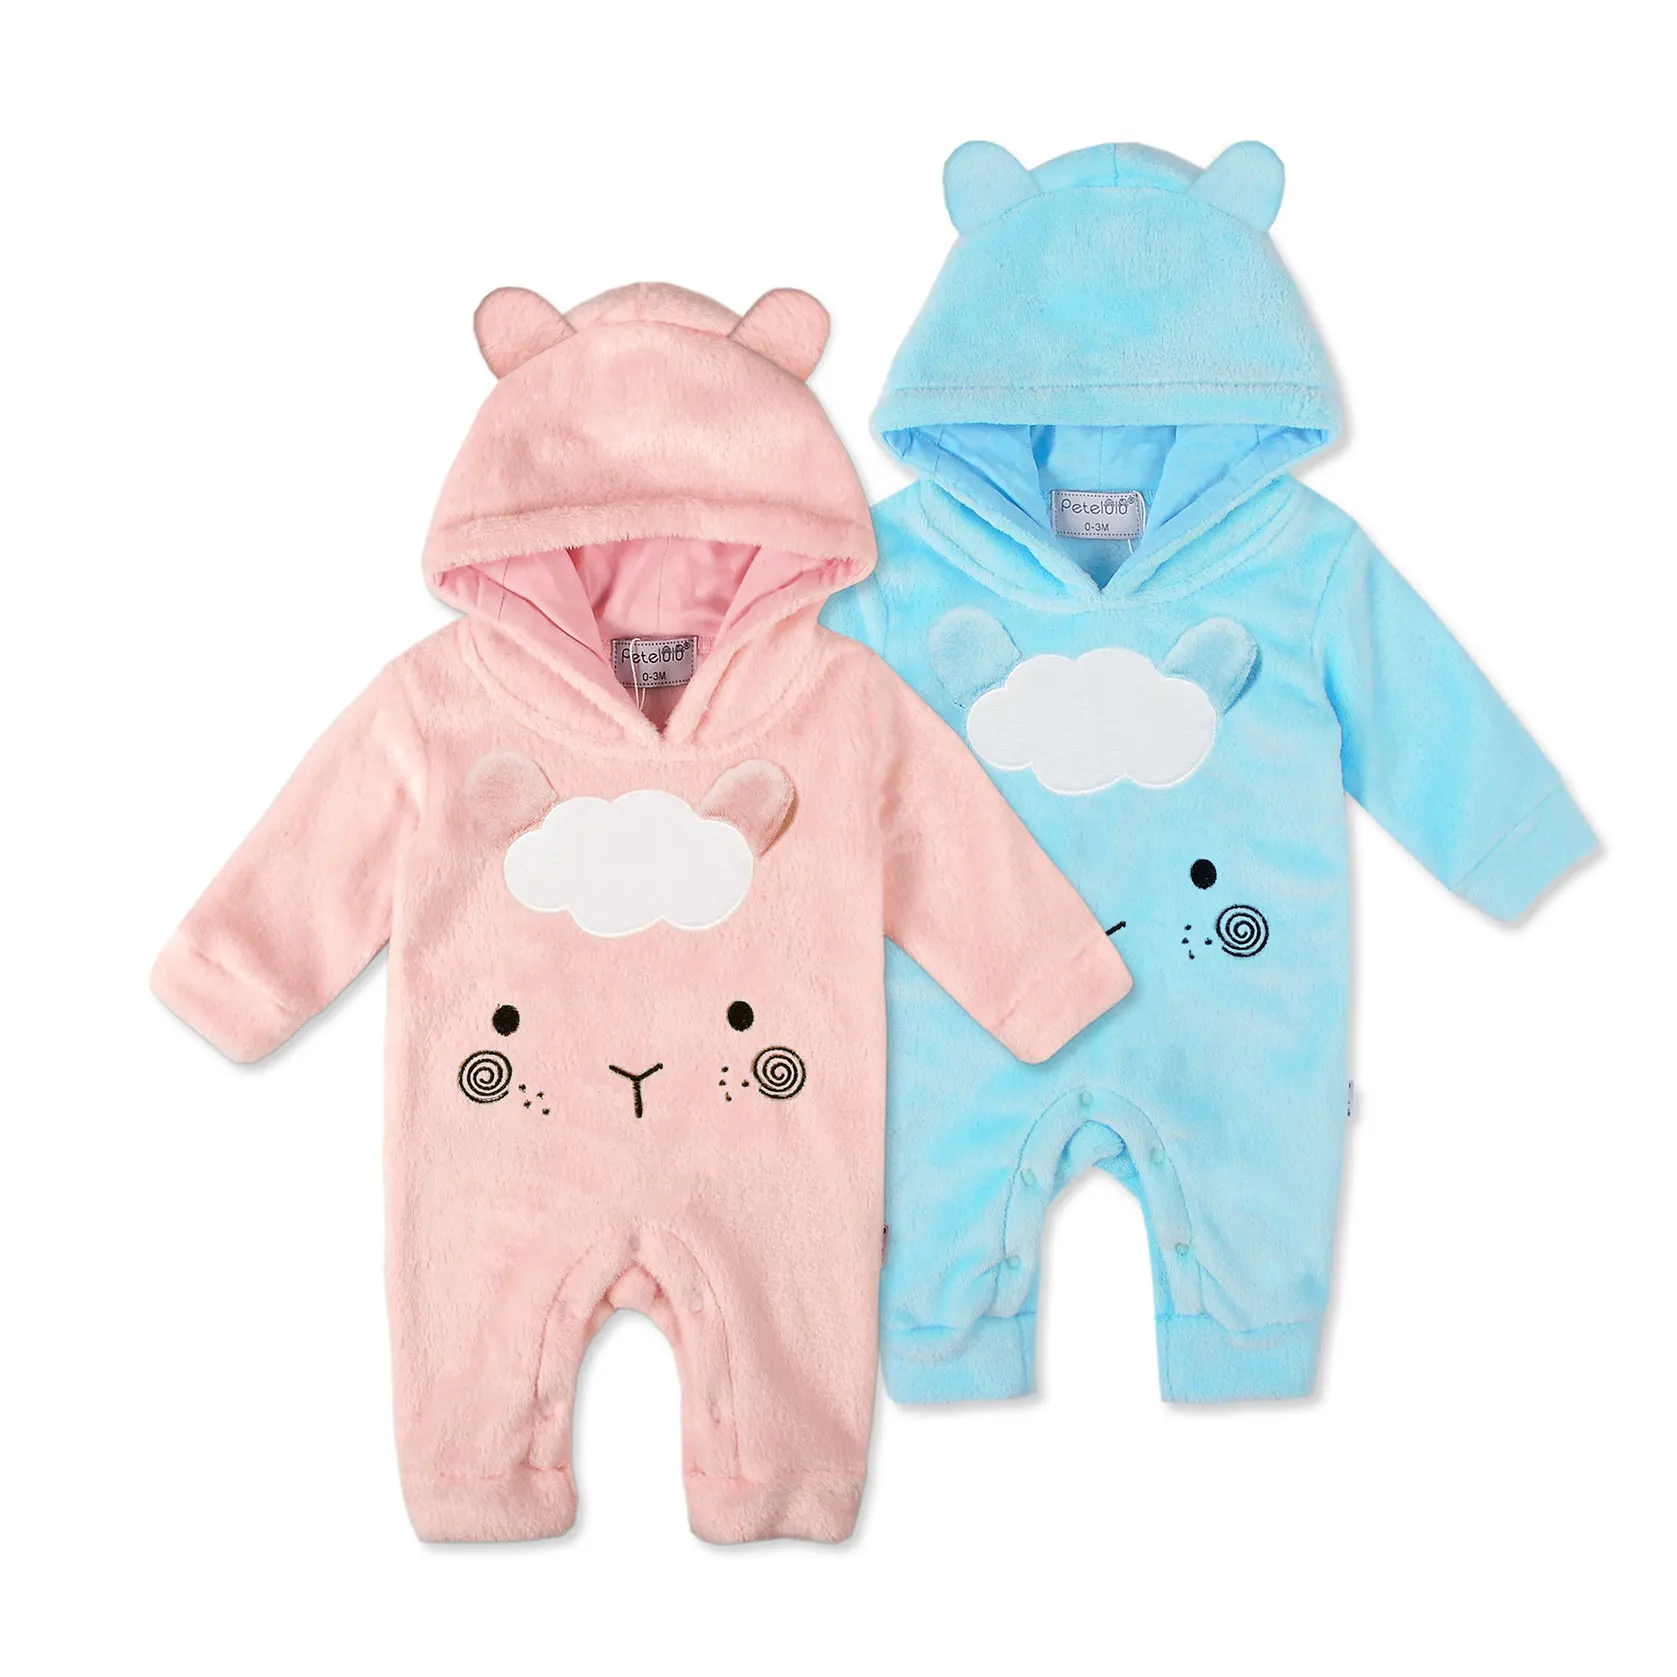 

The Most popular Baby Winter Clothing Ready to Ship Baby Rompers Foshan-Petelulu Hooded Baby Jumpsuit Animal Sheep Wholesale